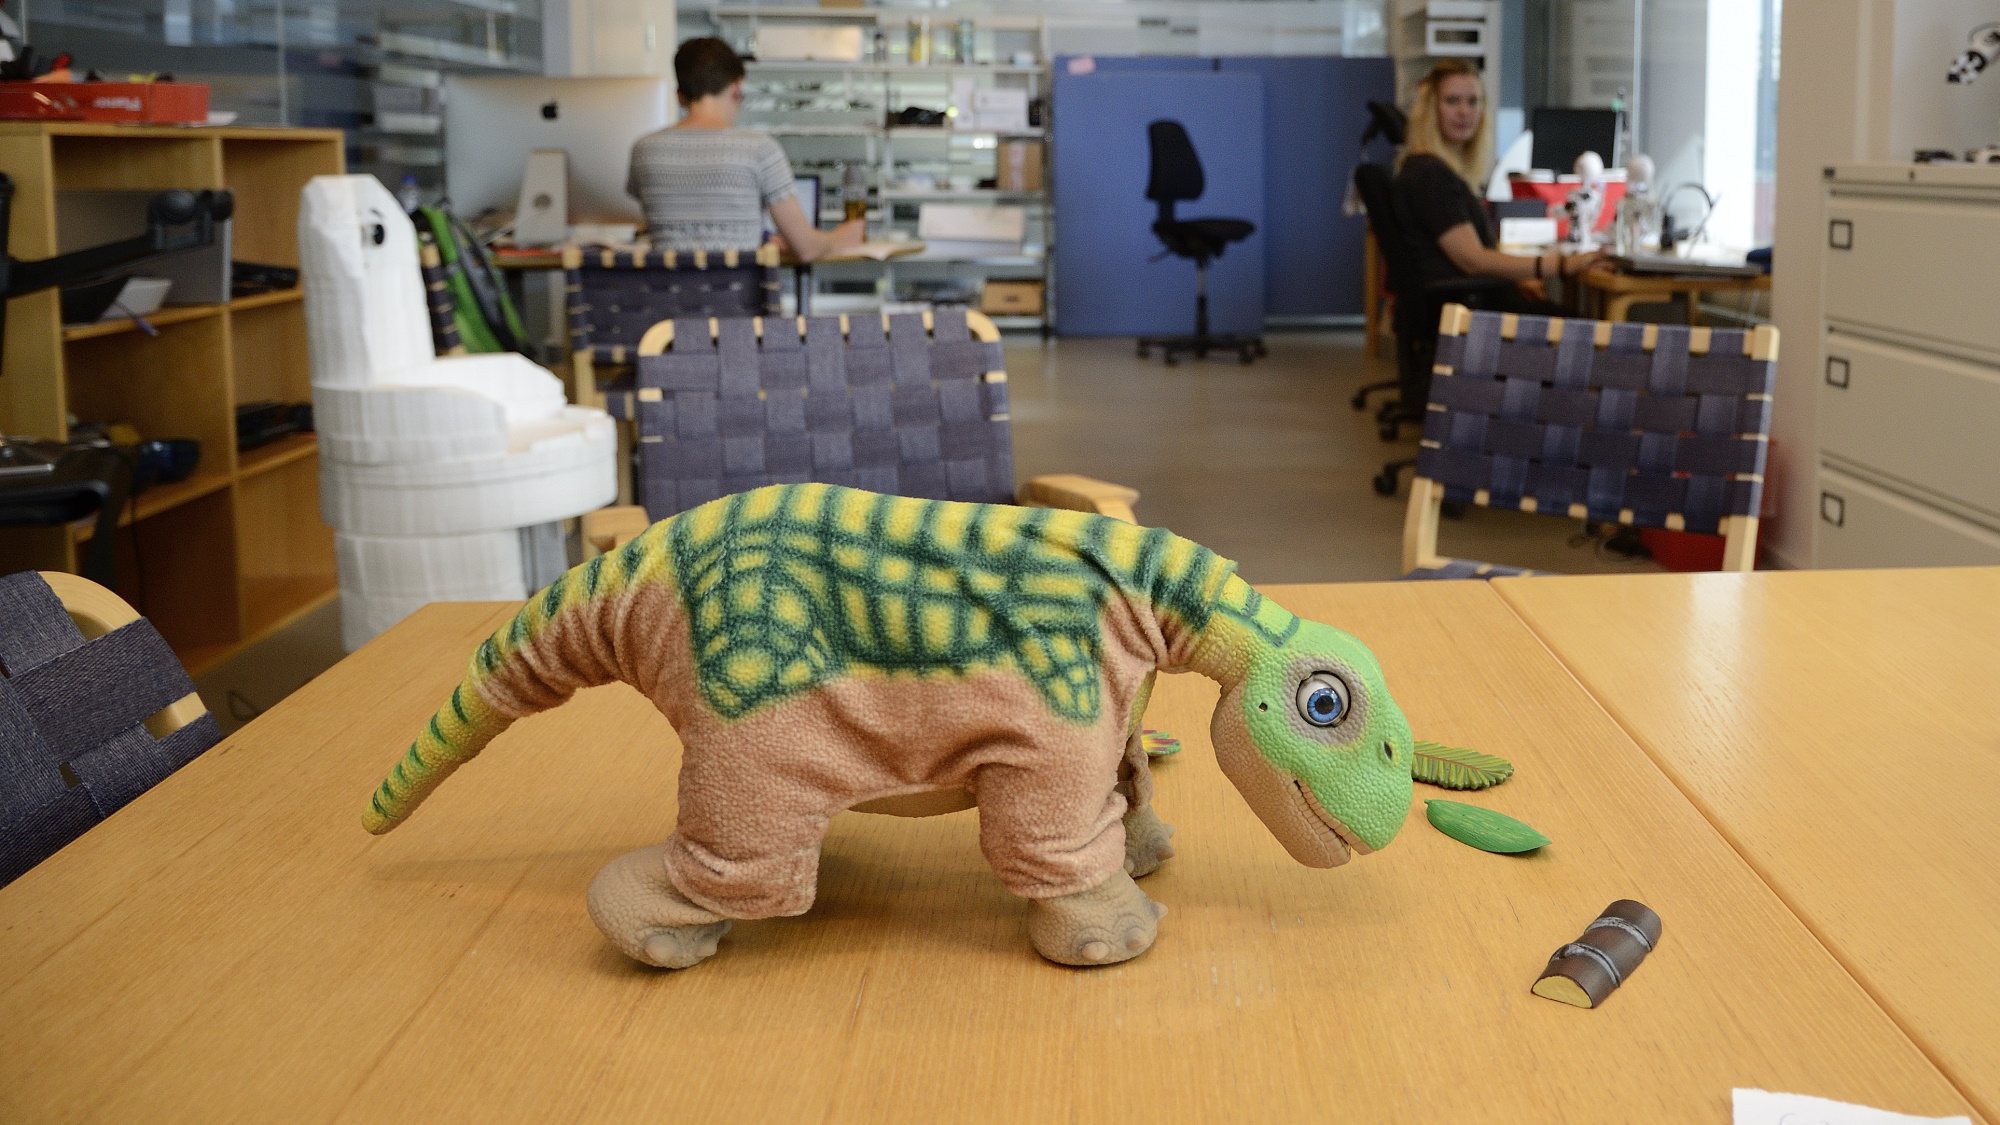 A Pleo robot craving for attention.